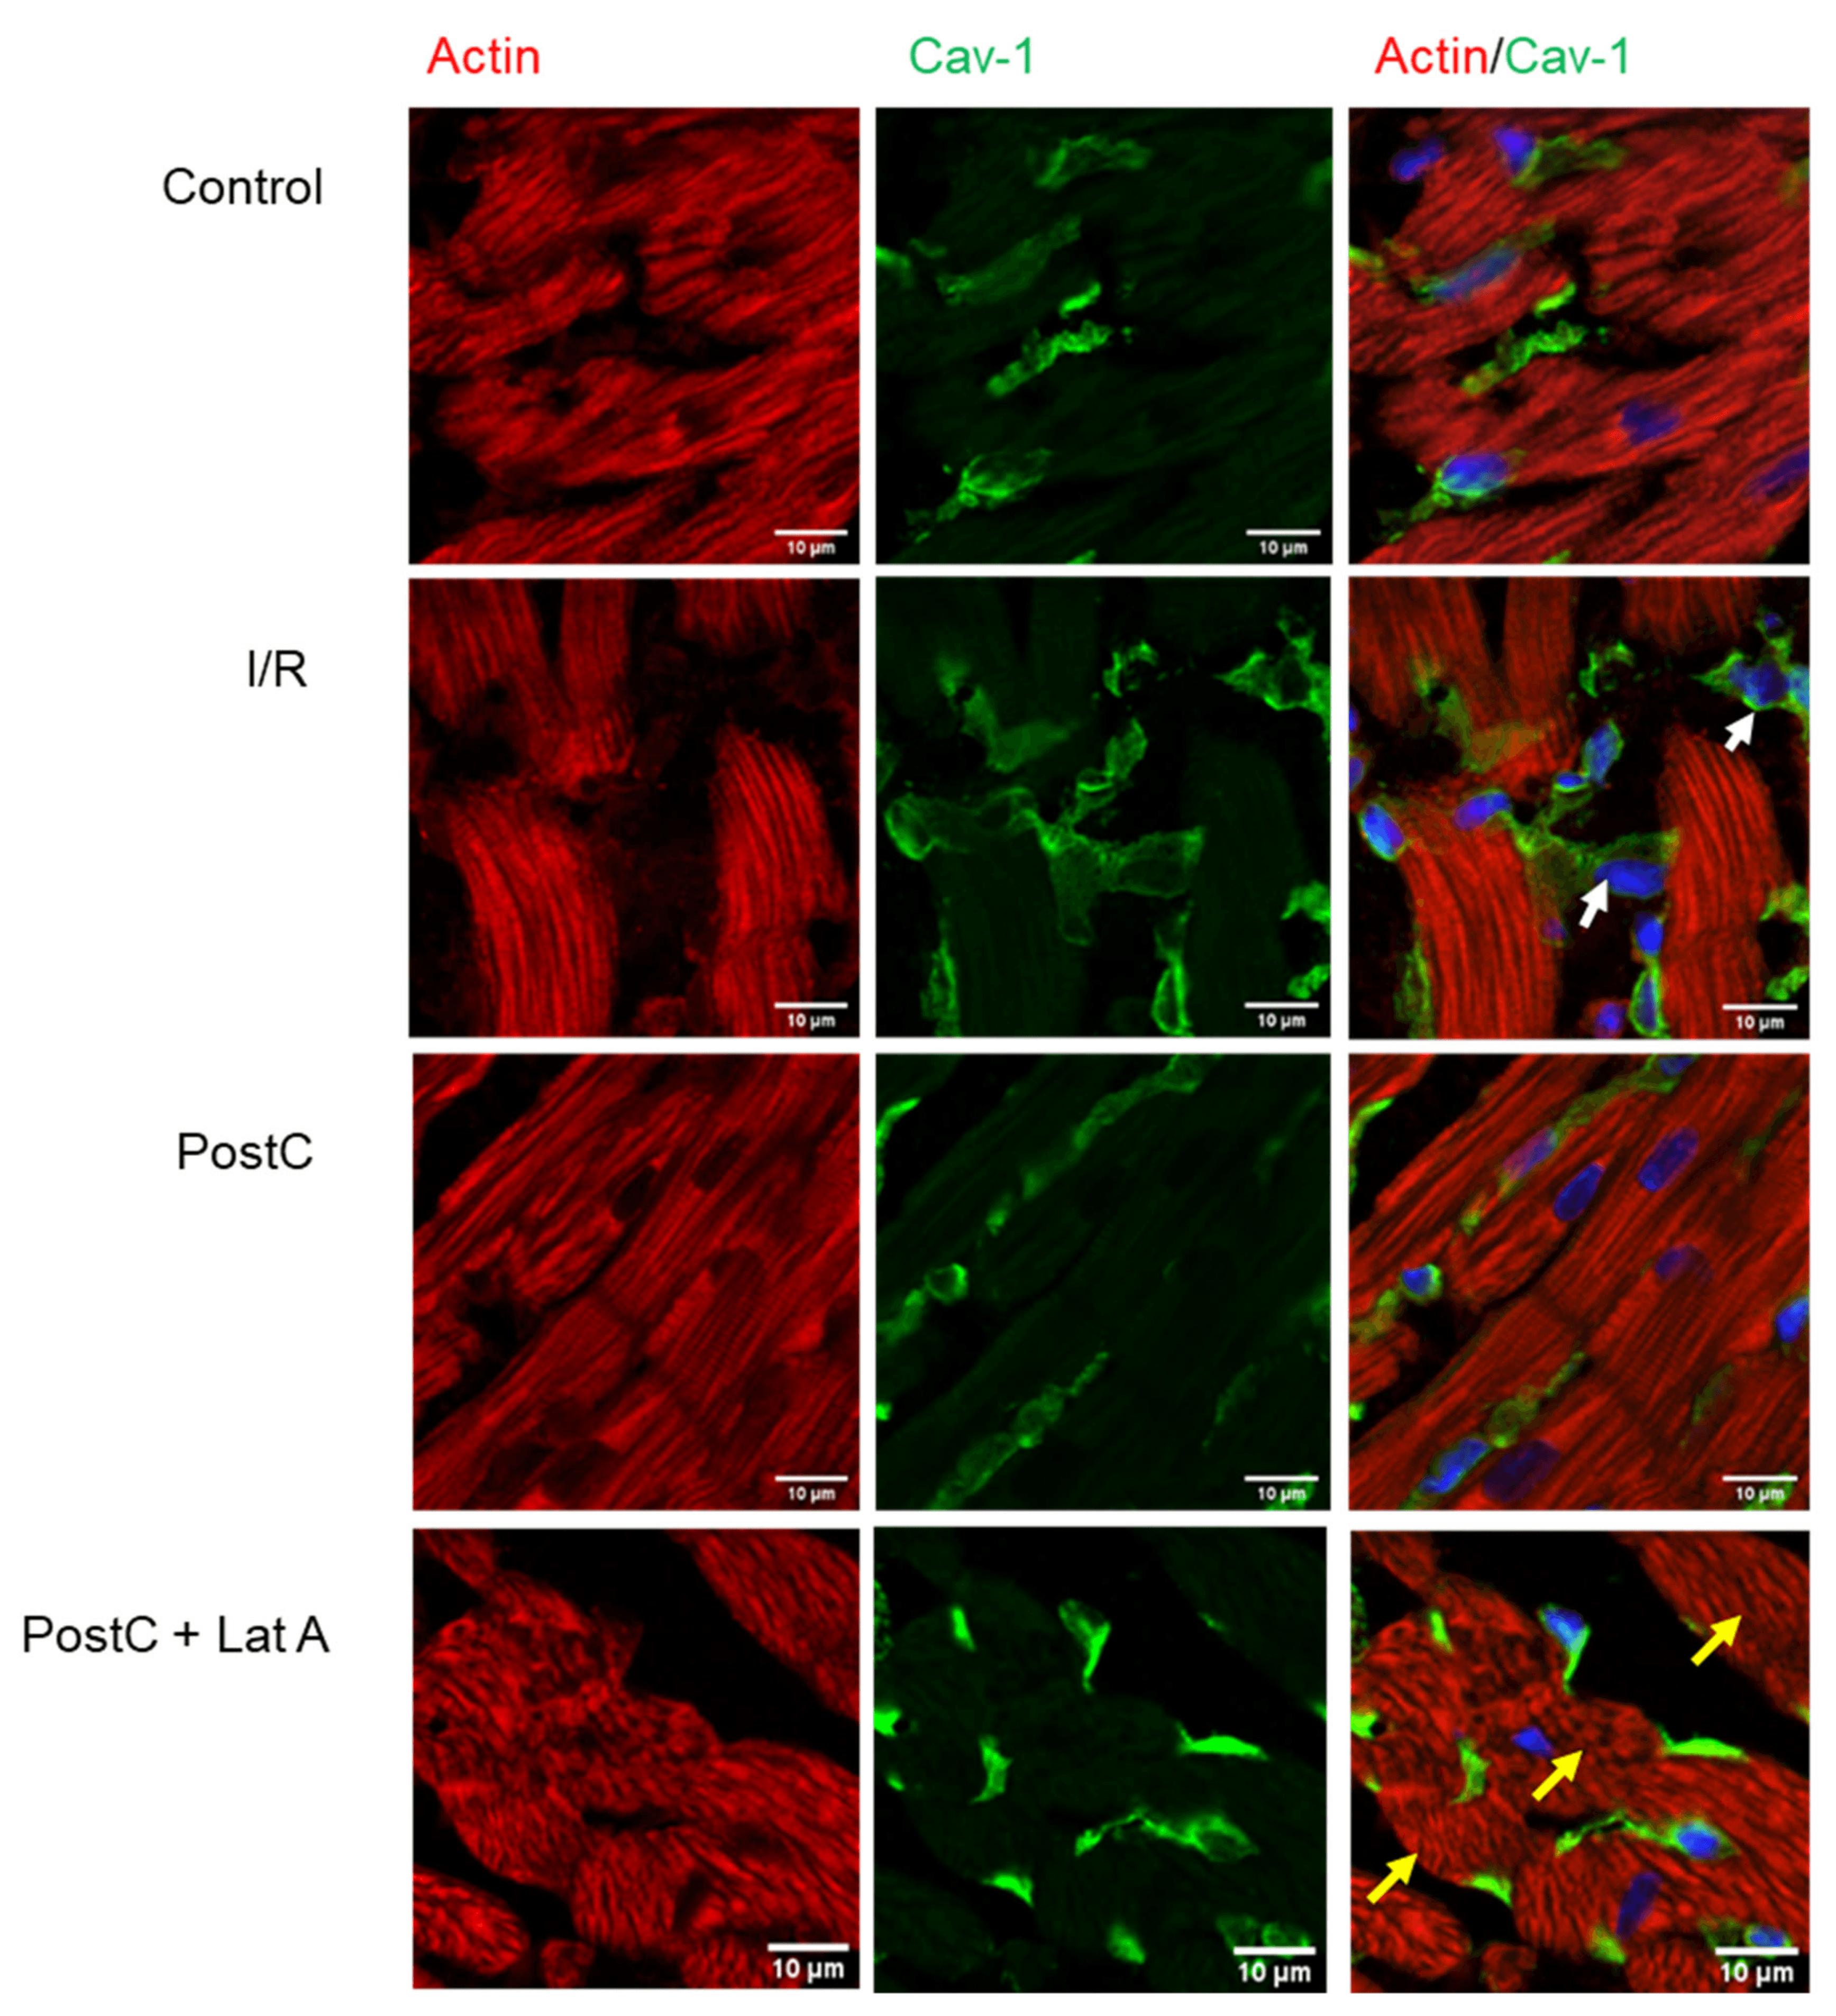 Co-localization of caveolin-1 and actin in post-conditioned hearts treated with latrunculin A. Representative confocal laser microscopy of the sections of frozen heart tissue after double-immunofluorescence staining of caveolin-1 (green) and actin (red). Cell nuclei were counterstained with DAPI. Source: <b>Actin-Cytoskeleton Drives Caveolae Signaling to Mitochondria during Postconditioning</b> by Correa <em>et. al.</em>, <em>Cells</em>. Feb. 2023.